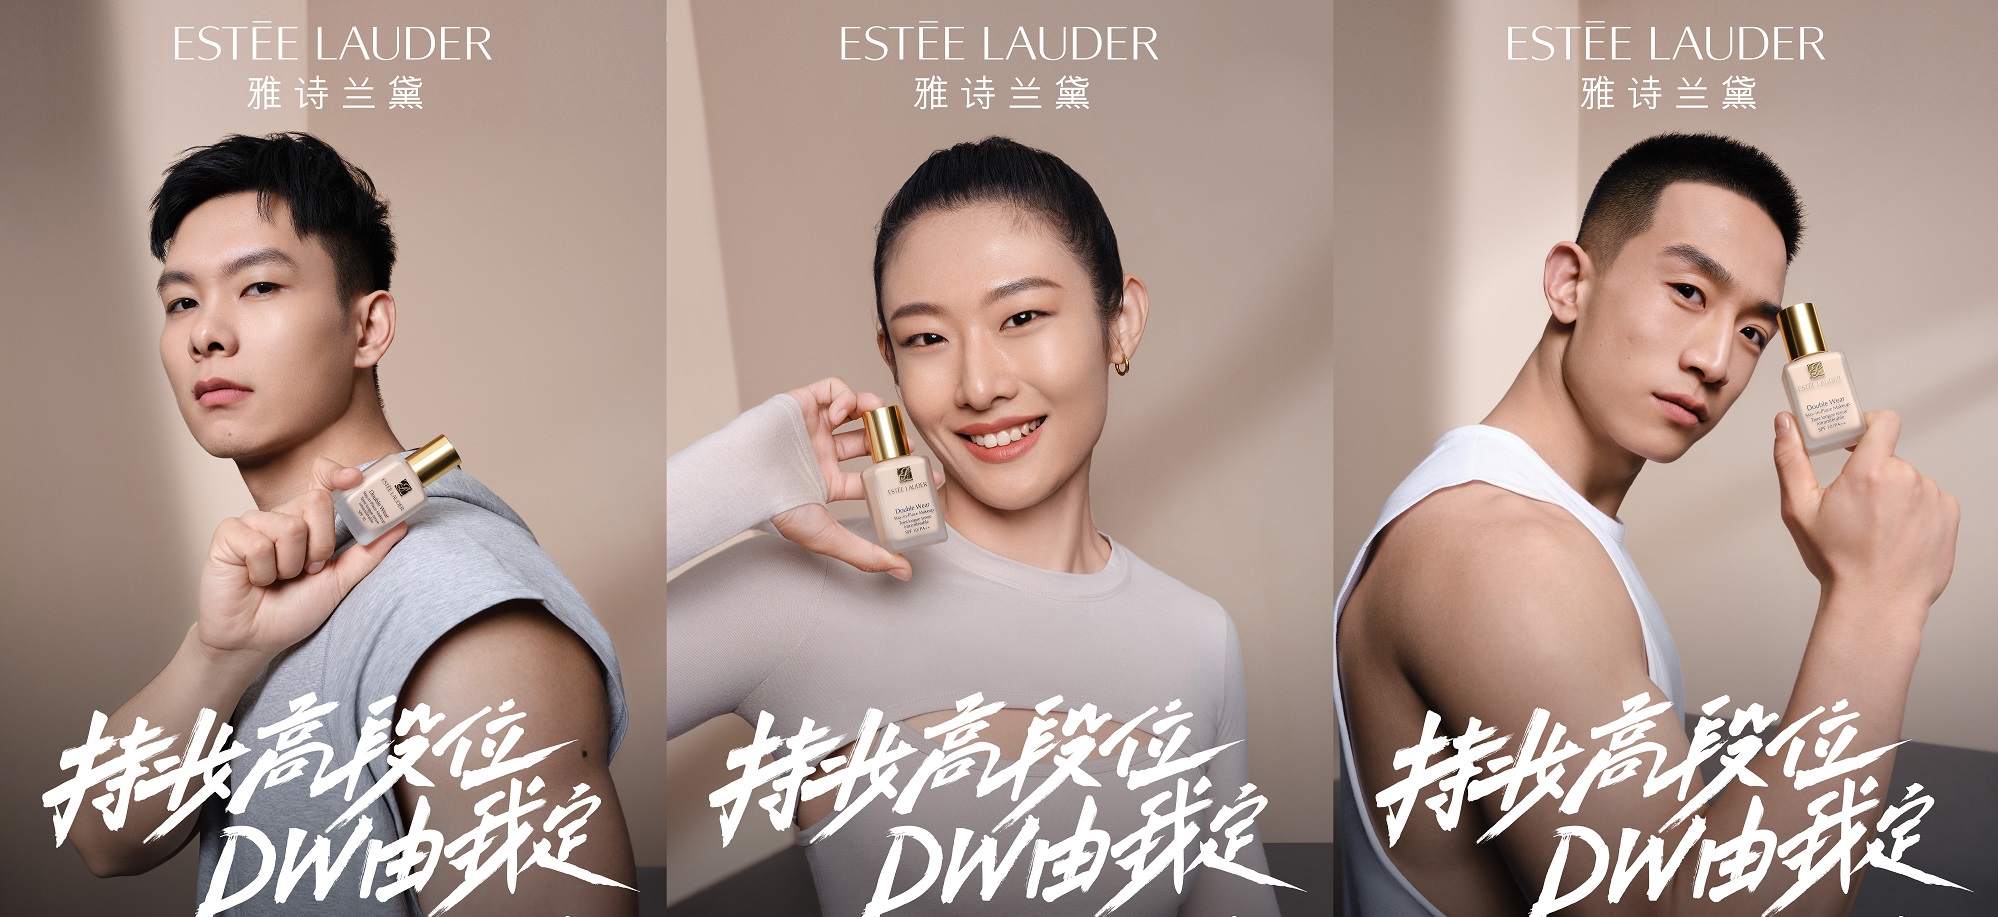 Estée Lauder redefines 'Double Wear', tapping into China's fitness